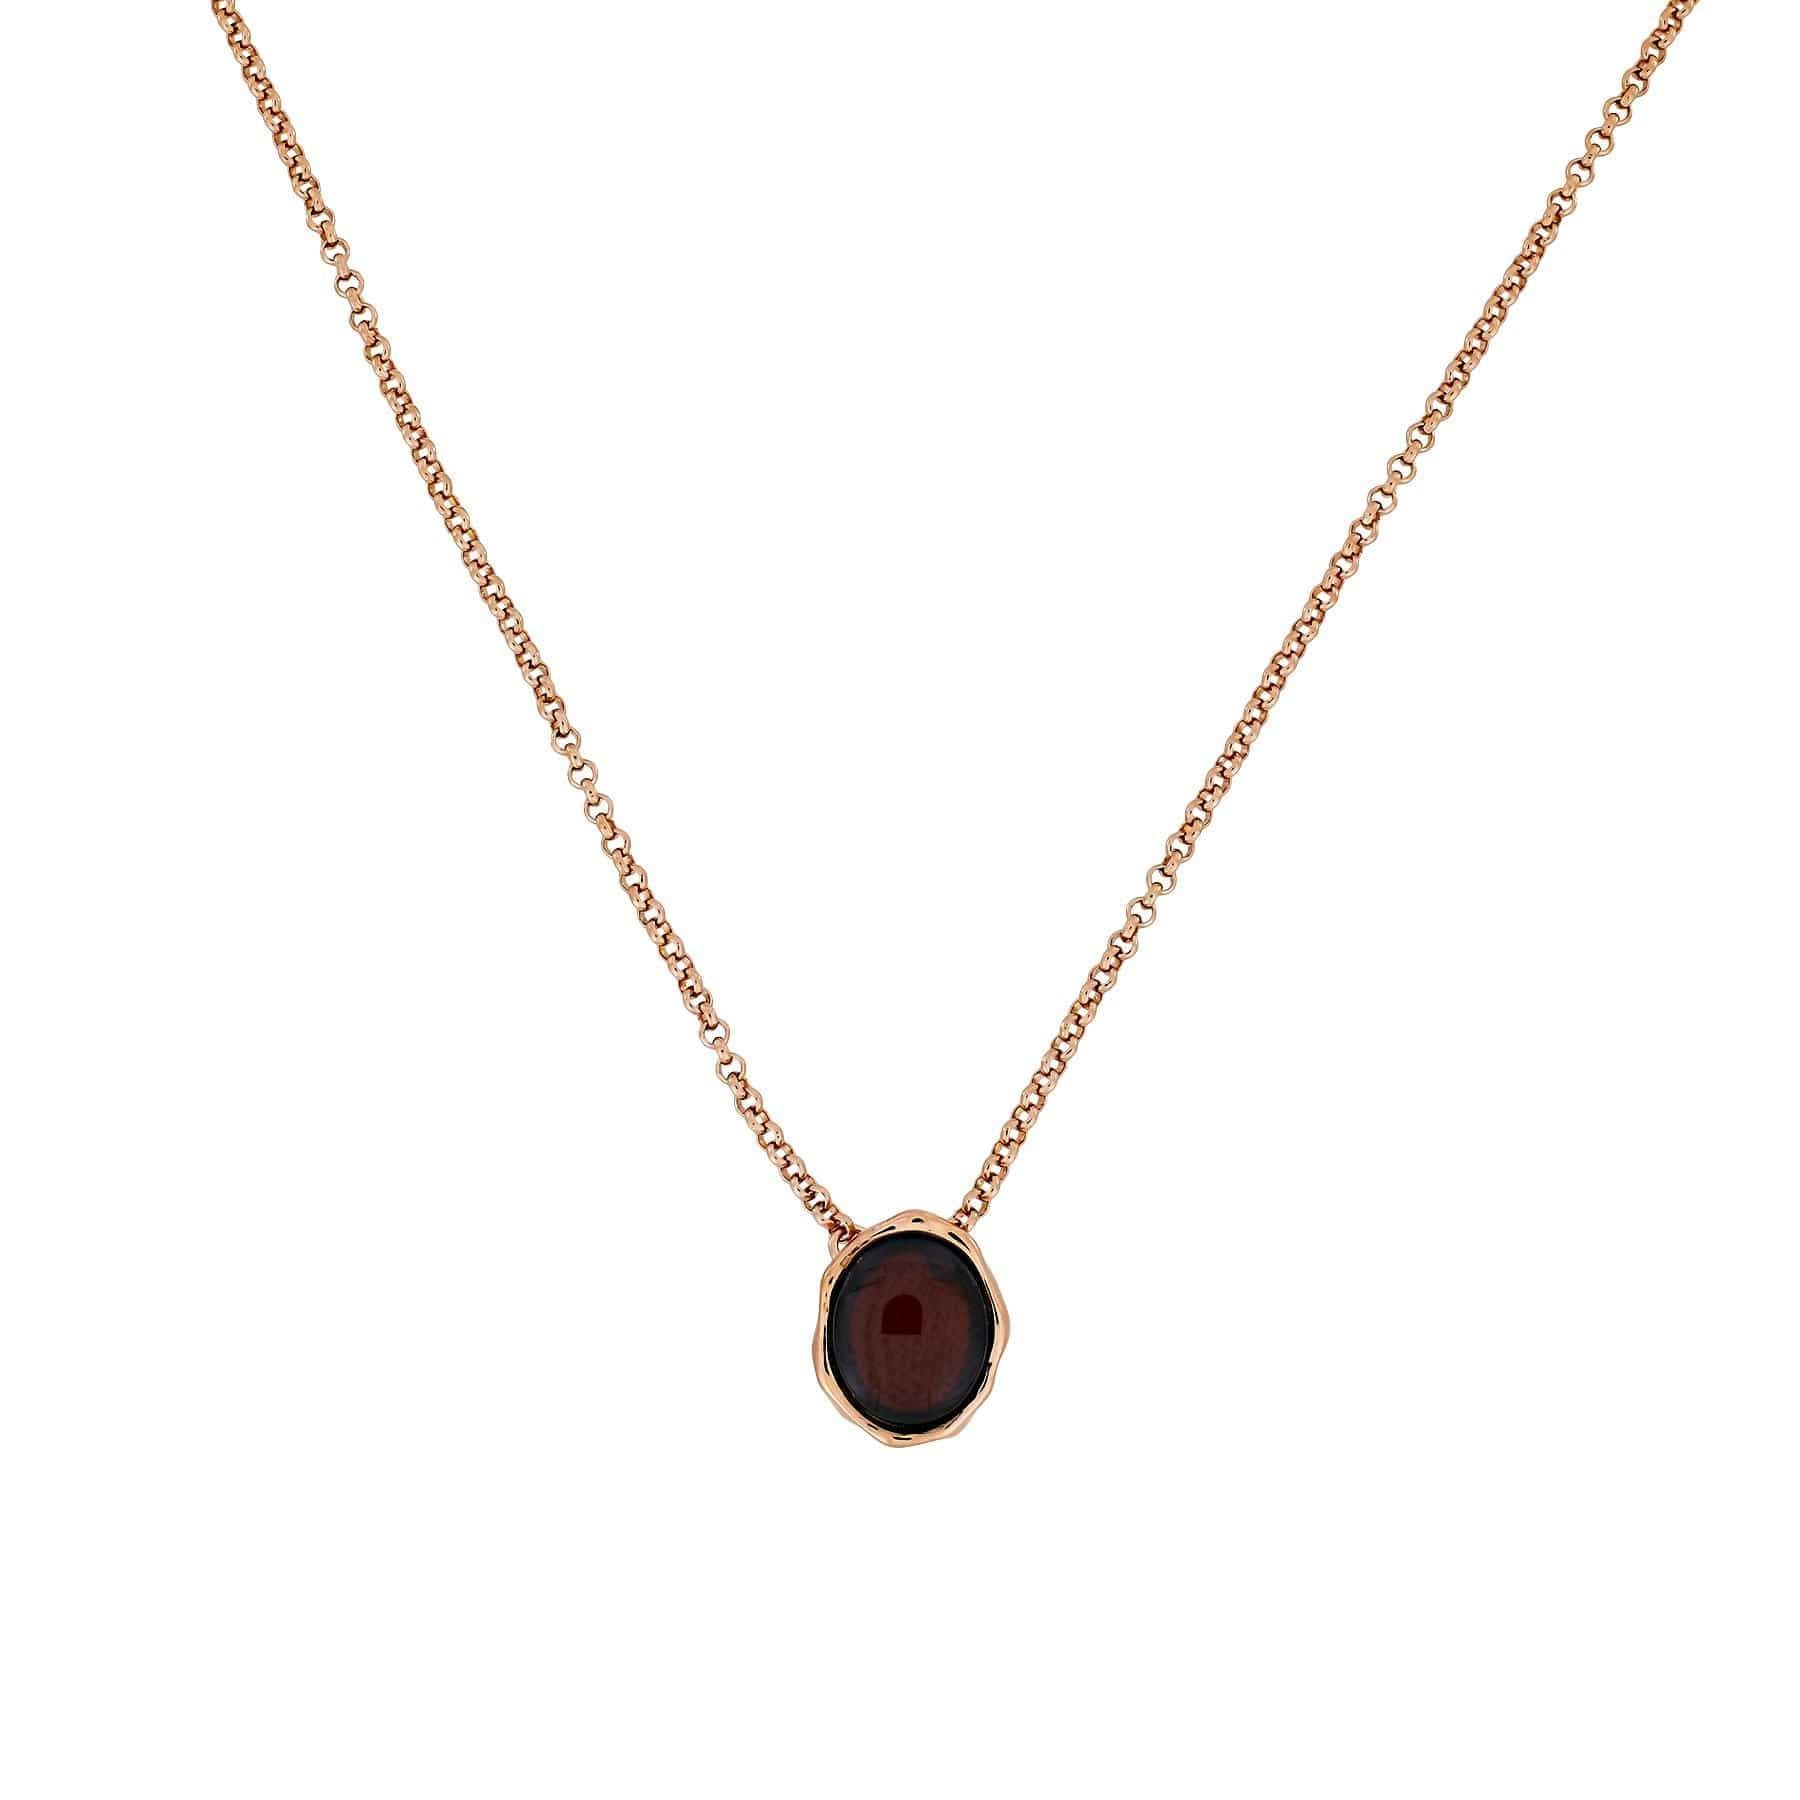 Northern Lights Baltic Amber Necklace in Rose Gold Vermeil